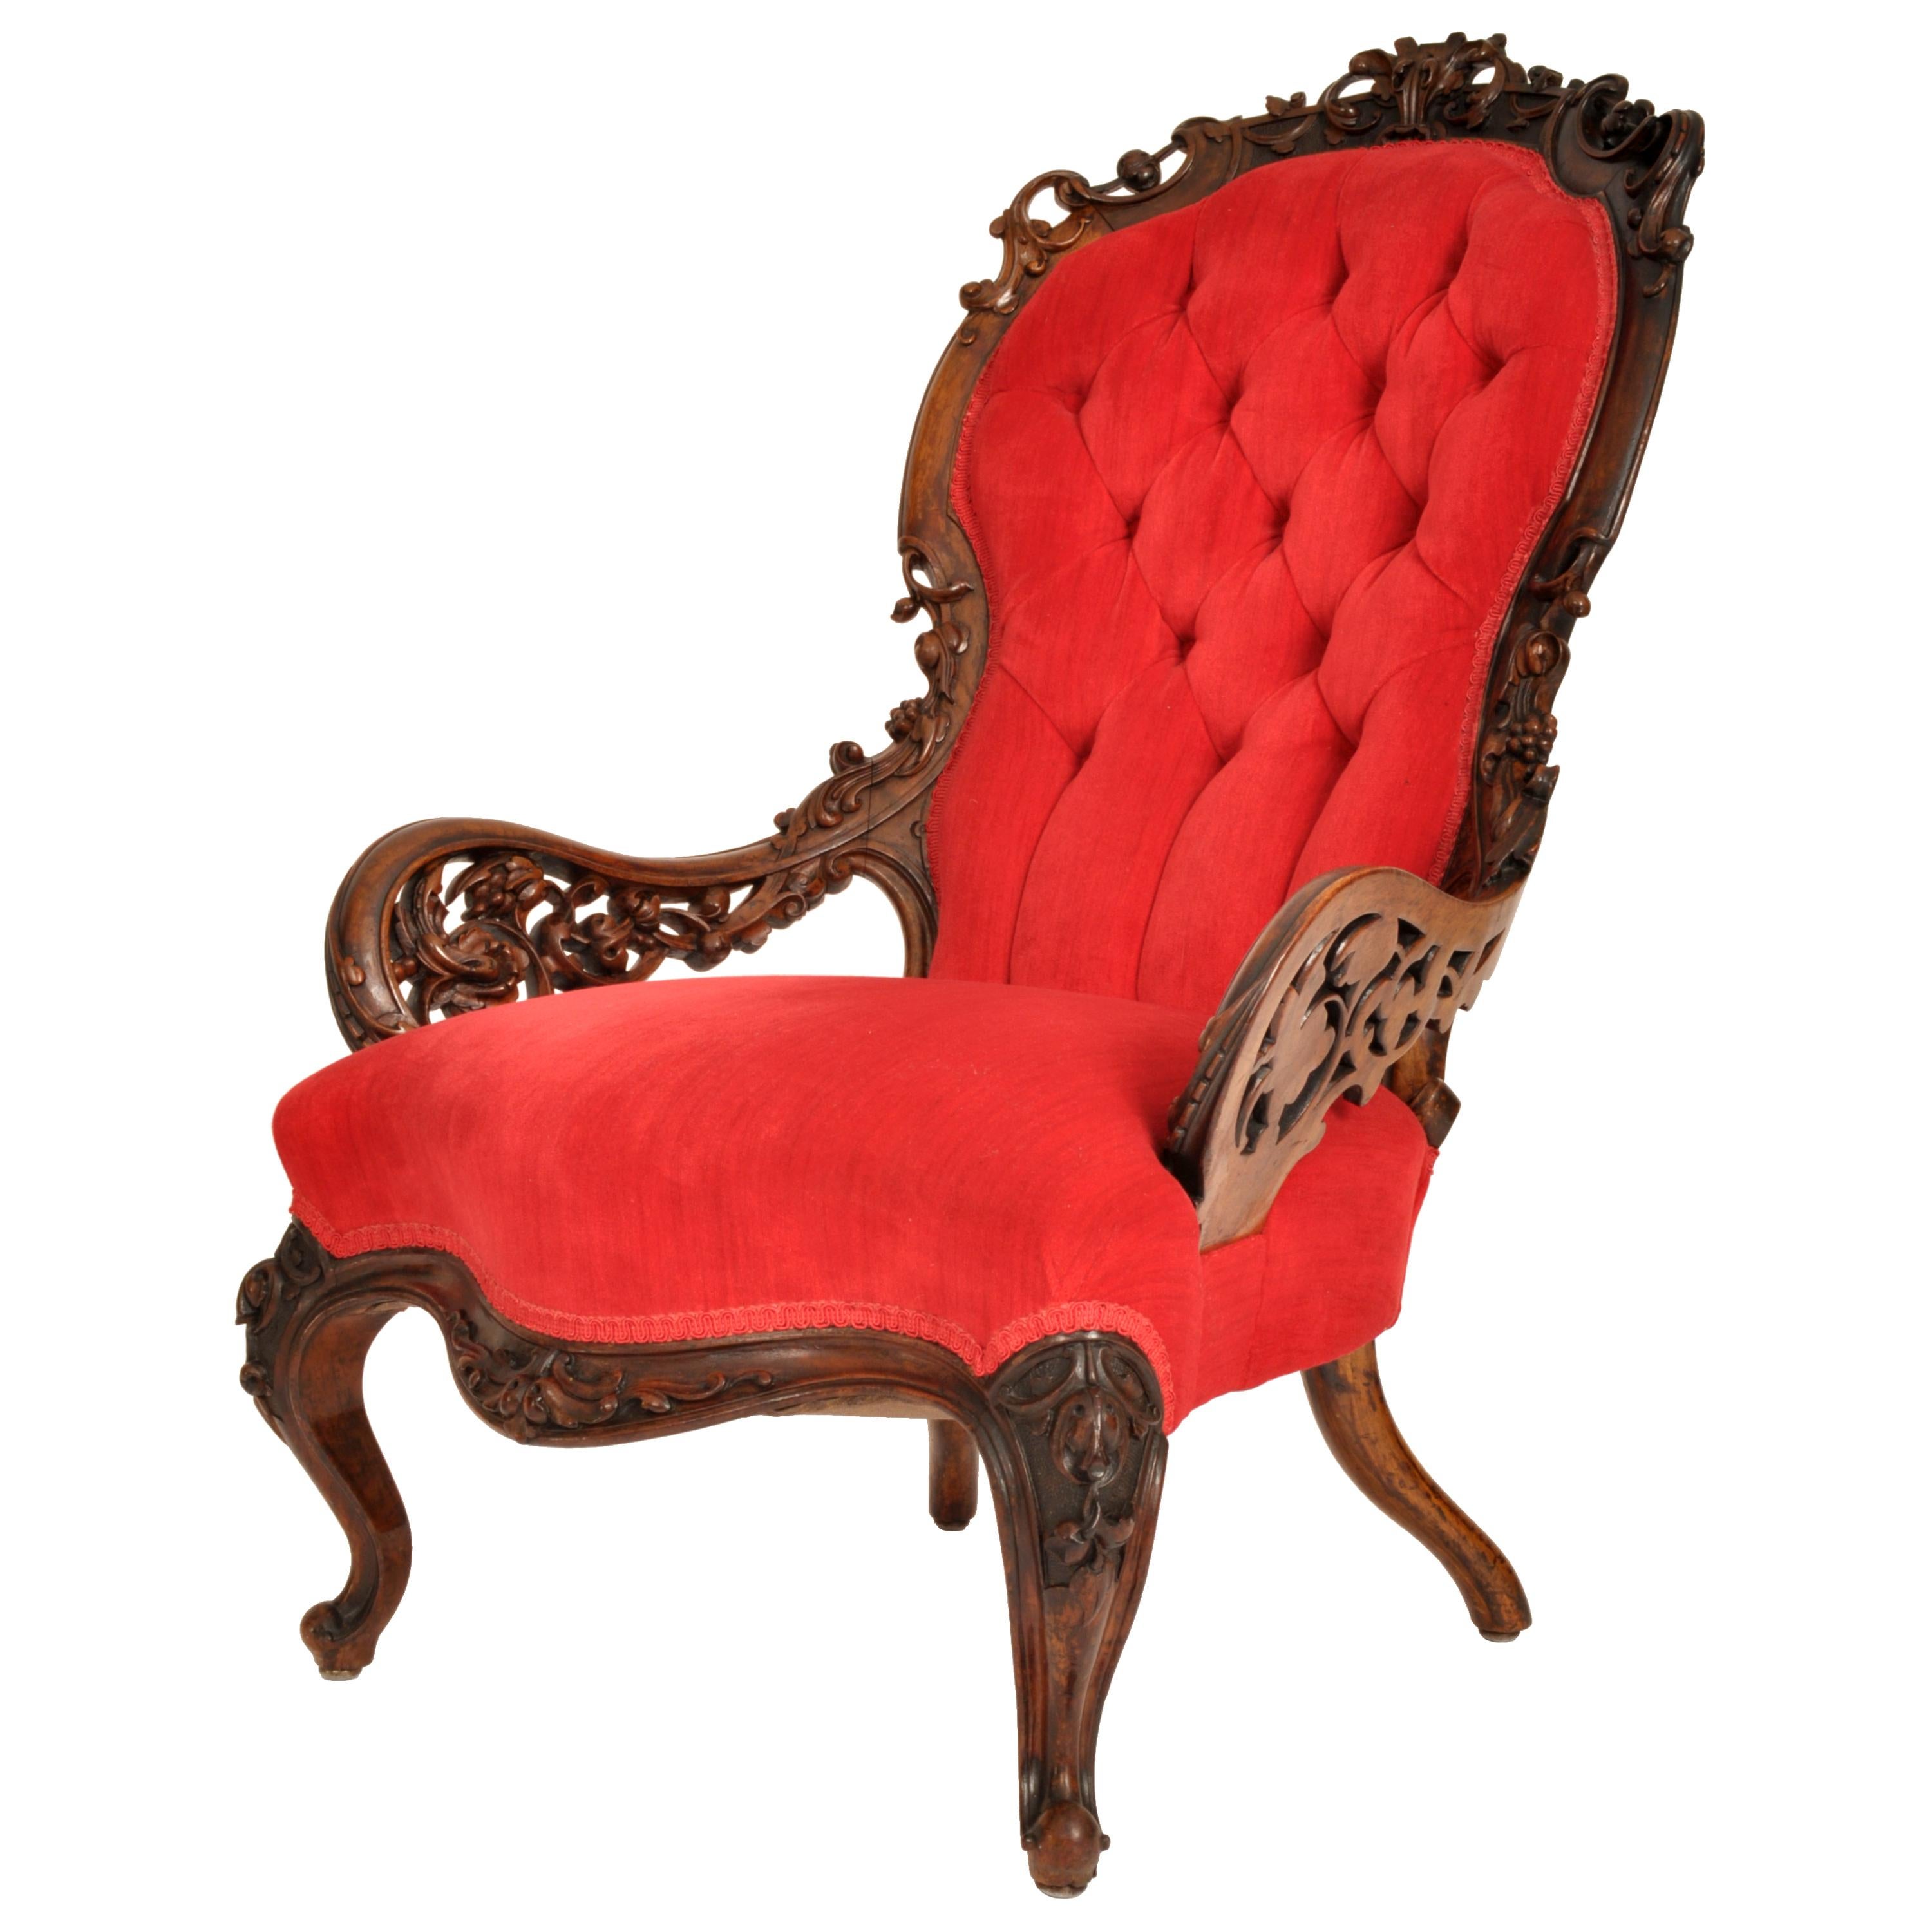 Rococo Revival Antique American Laminated & Carved Rococco Armchair John Belter Meeks NY 1850's